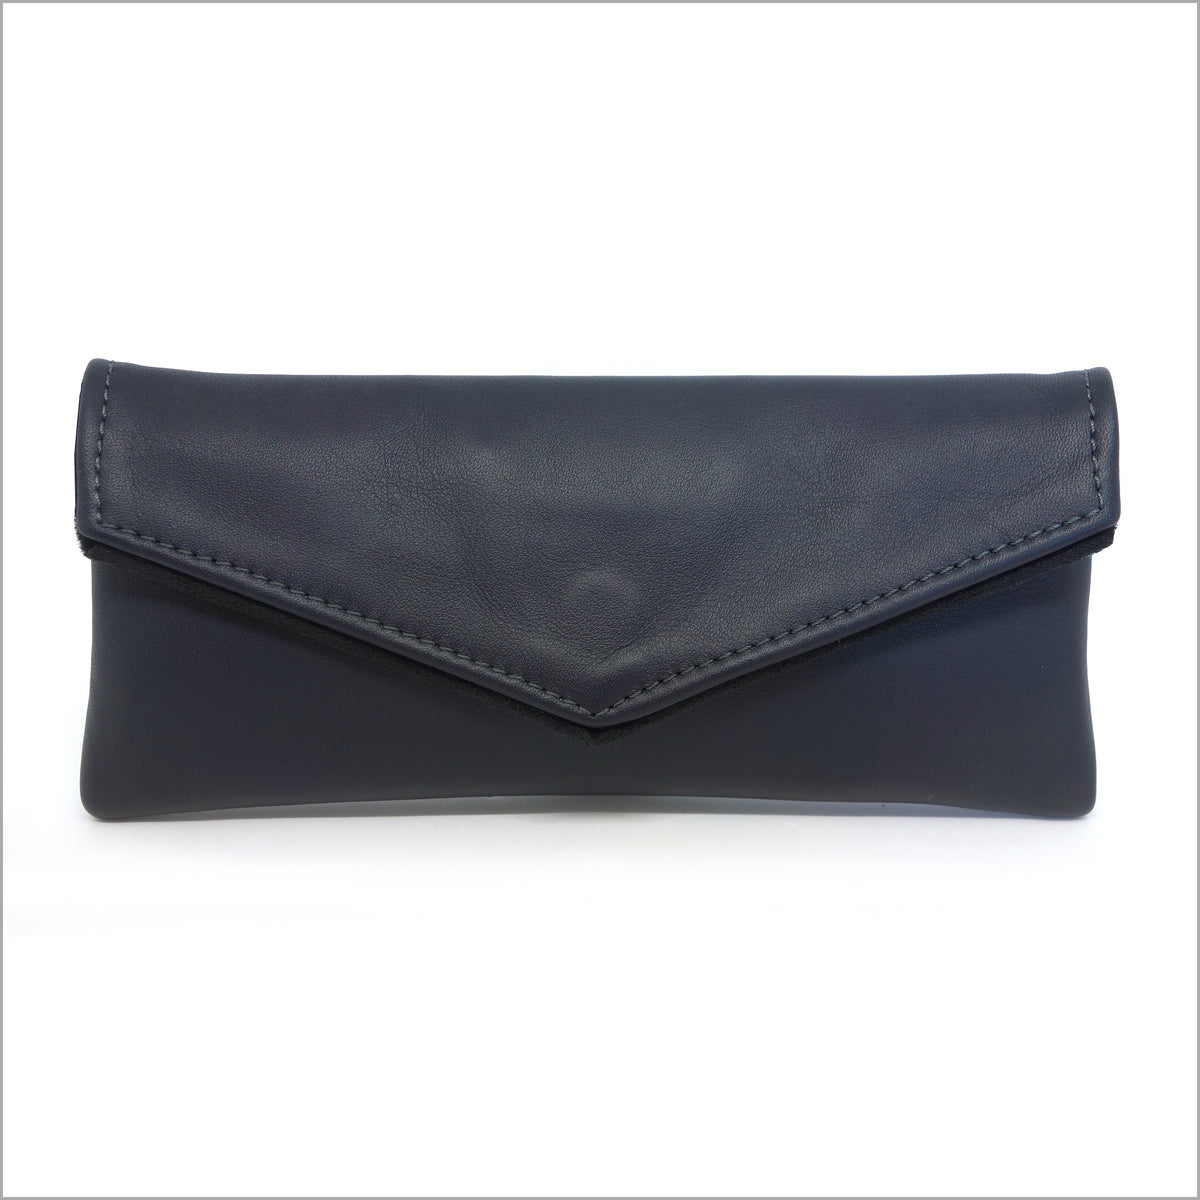 Sunglasses case in soft navy leather